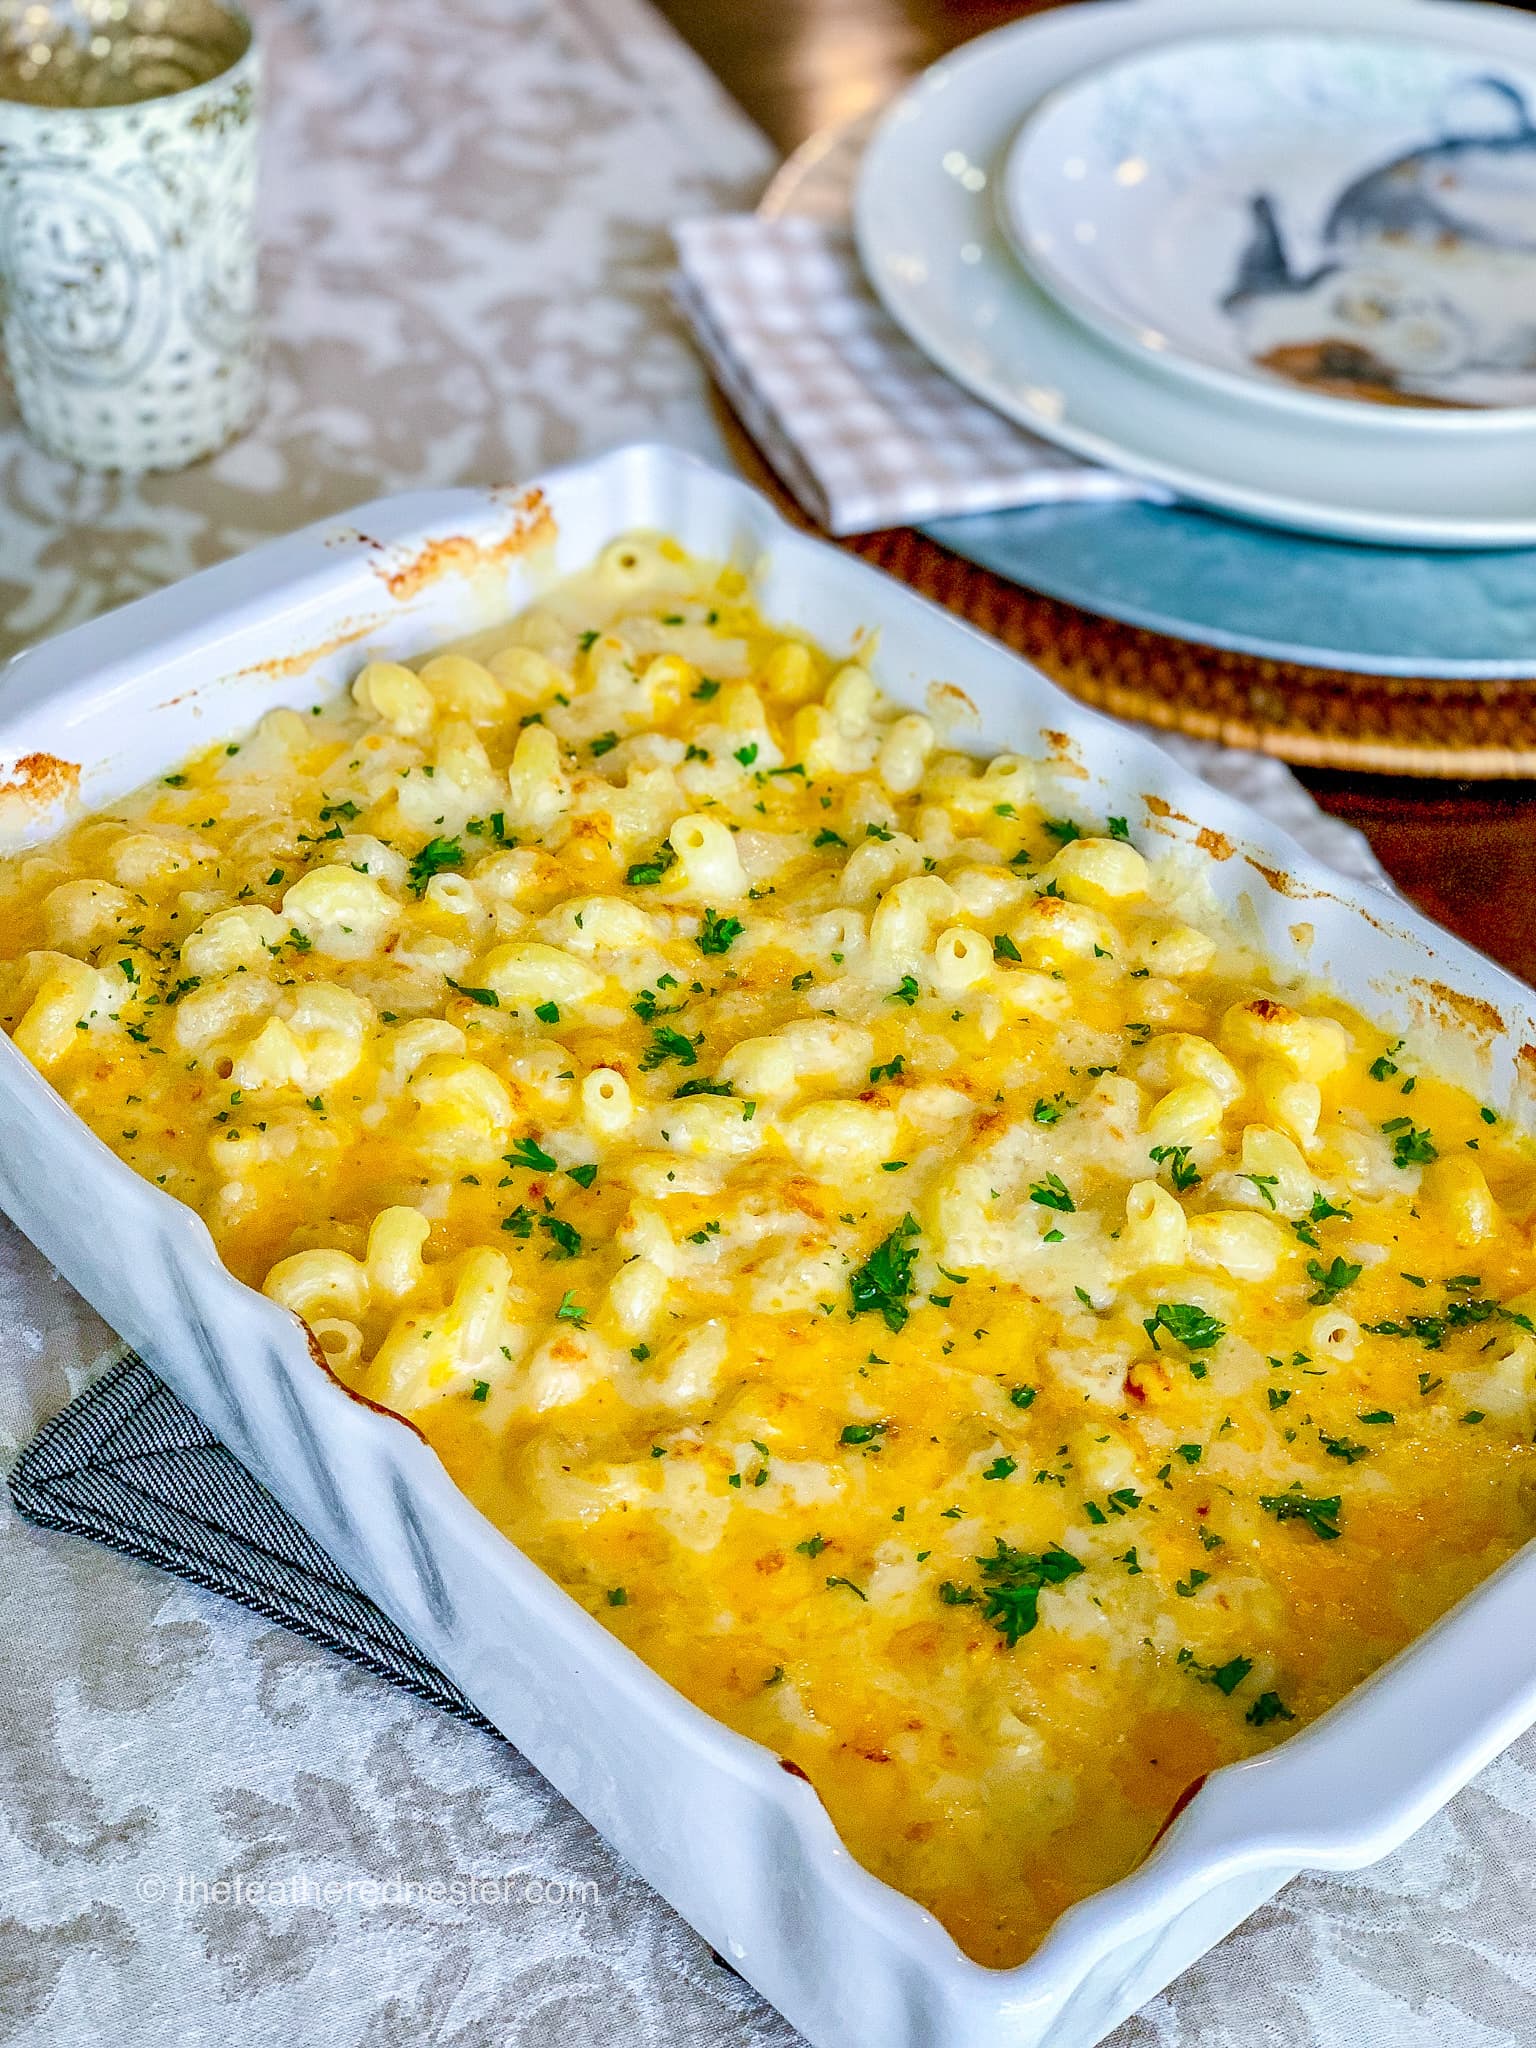 A casserole dish of macaroni and cheese with plates in the background.